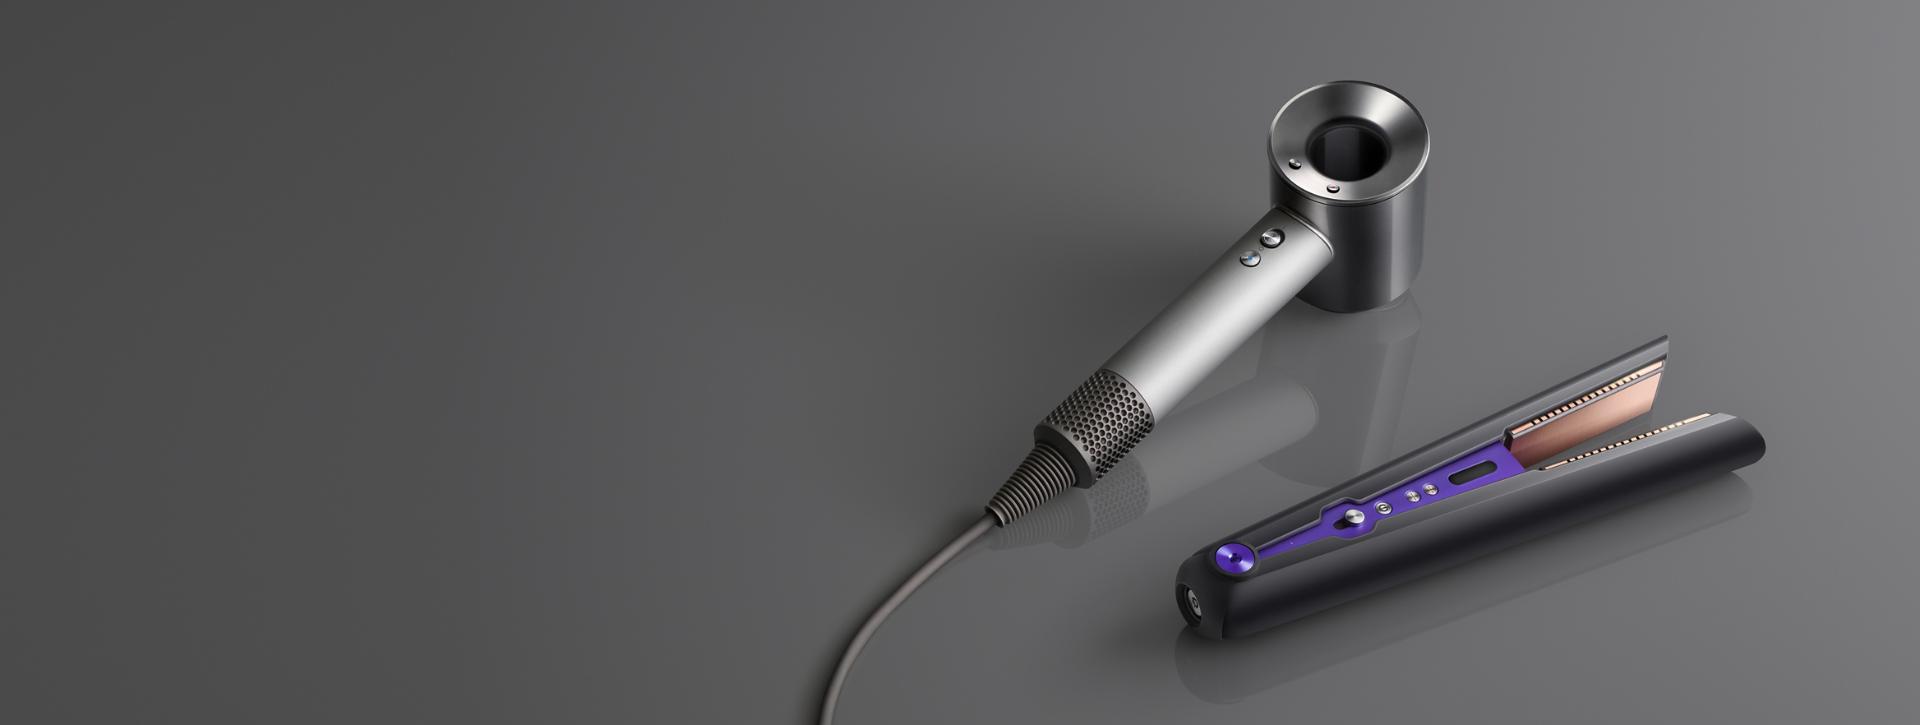 Dyson Corrale™  straightener and Dyson Supersonic™  hair dryer Professional